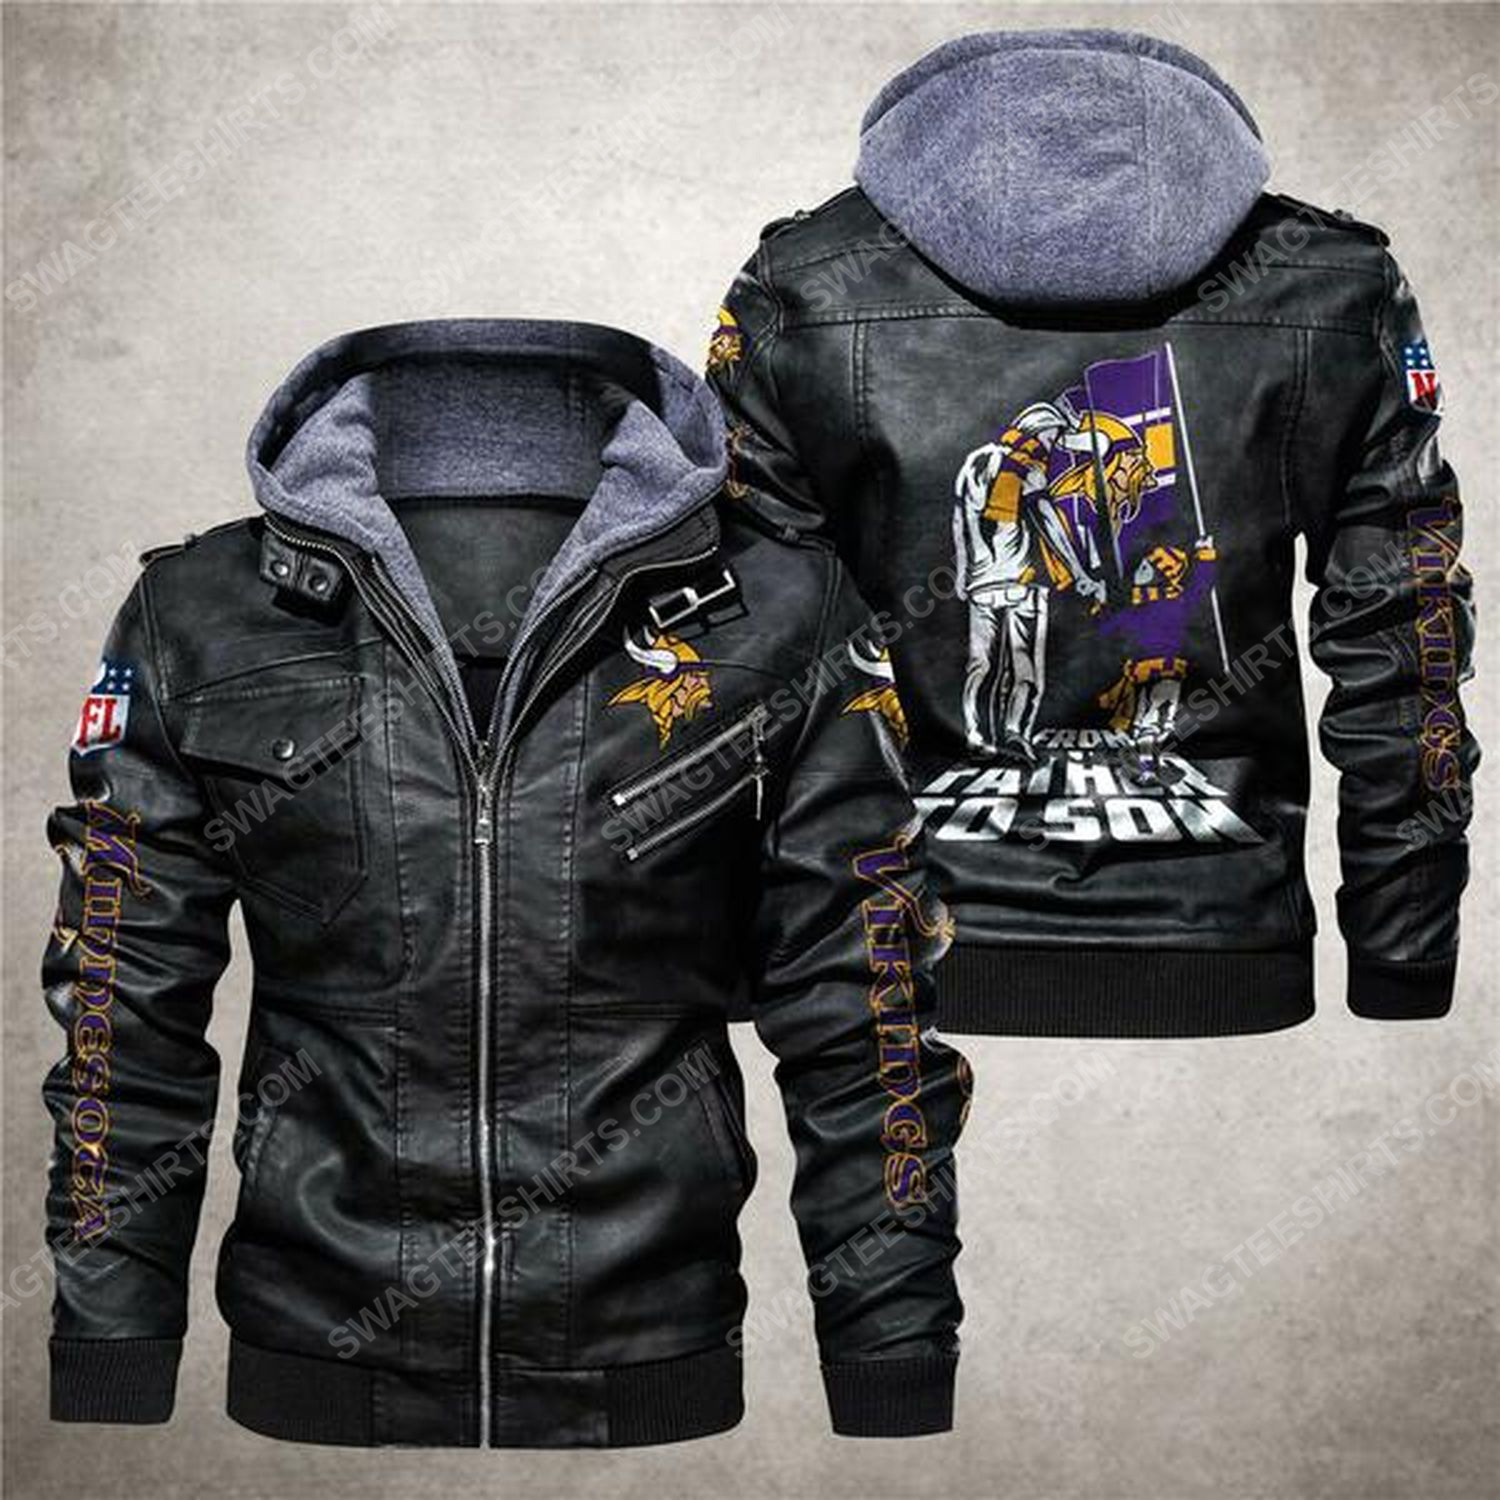 National football league minnesota vikings from father to son leather jacket - black